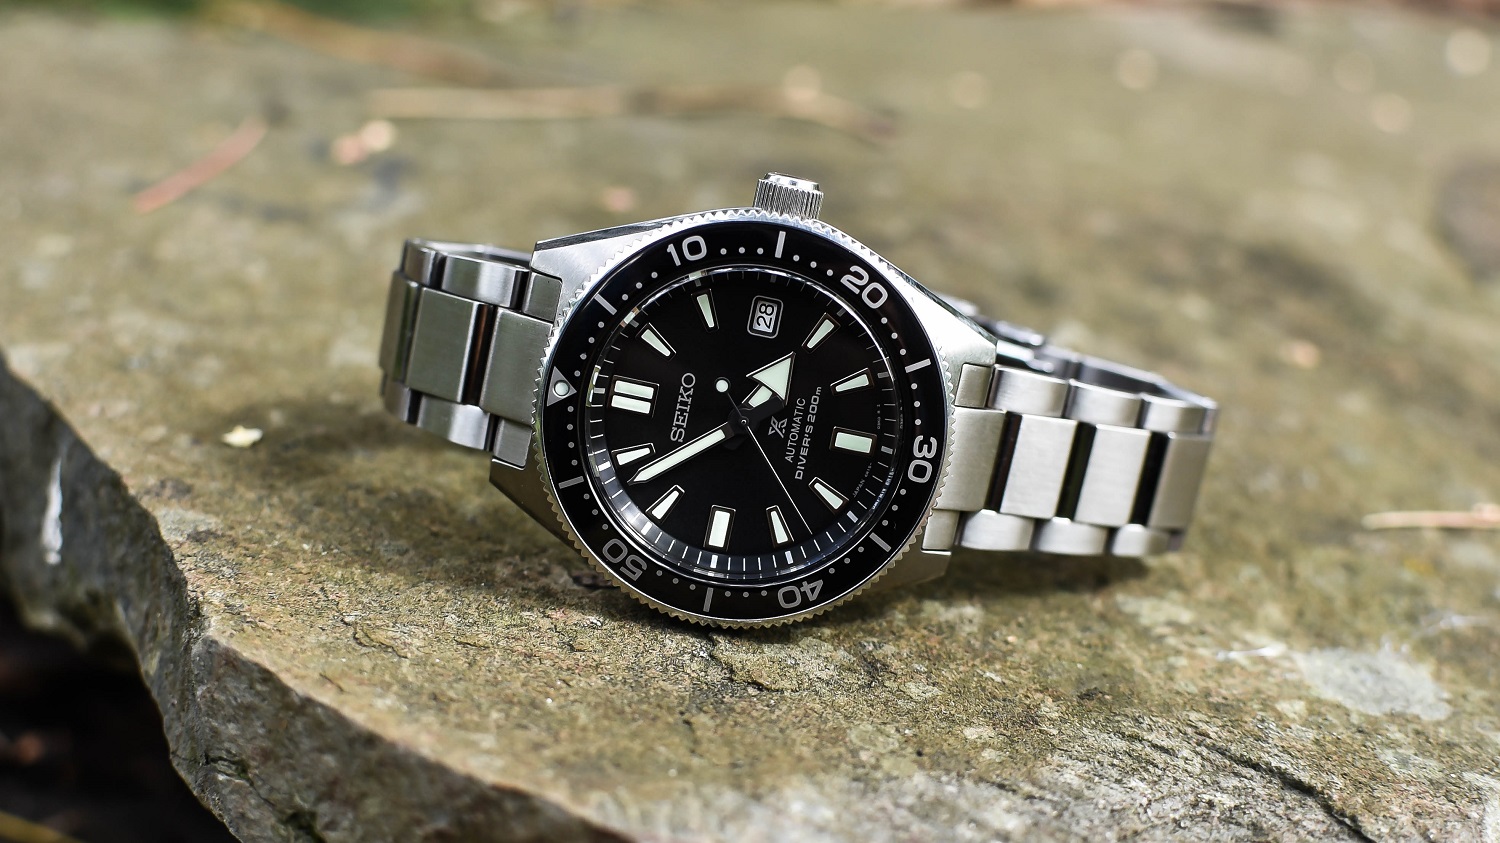 SBDC051 Watch Review | Two Broke Snobs